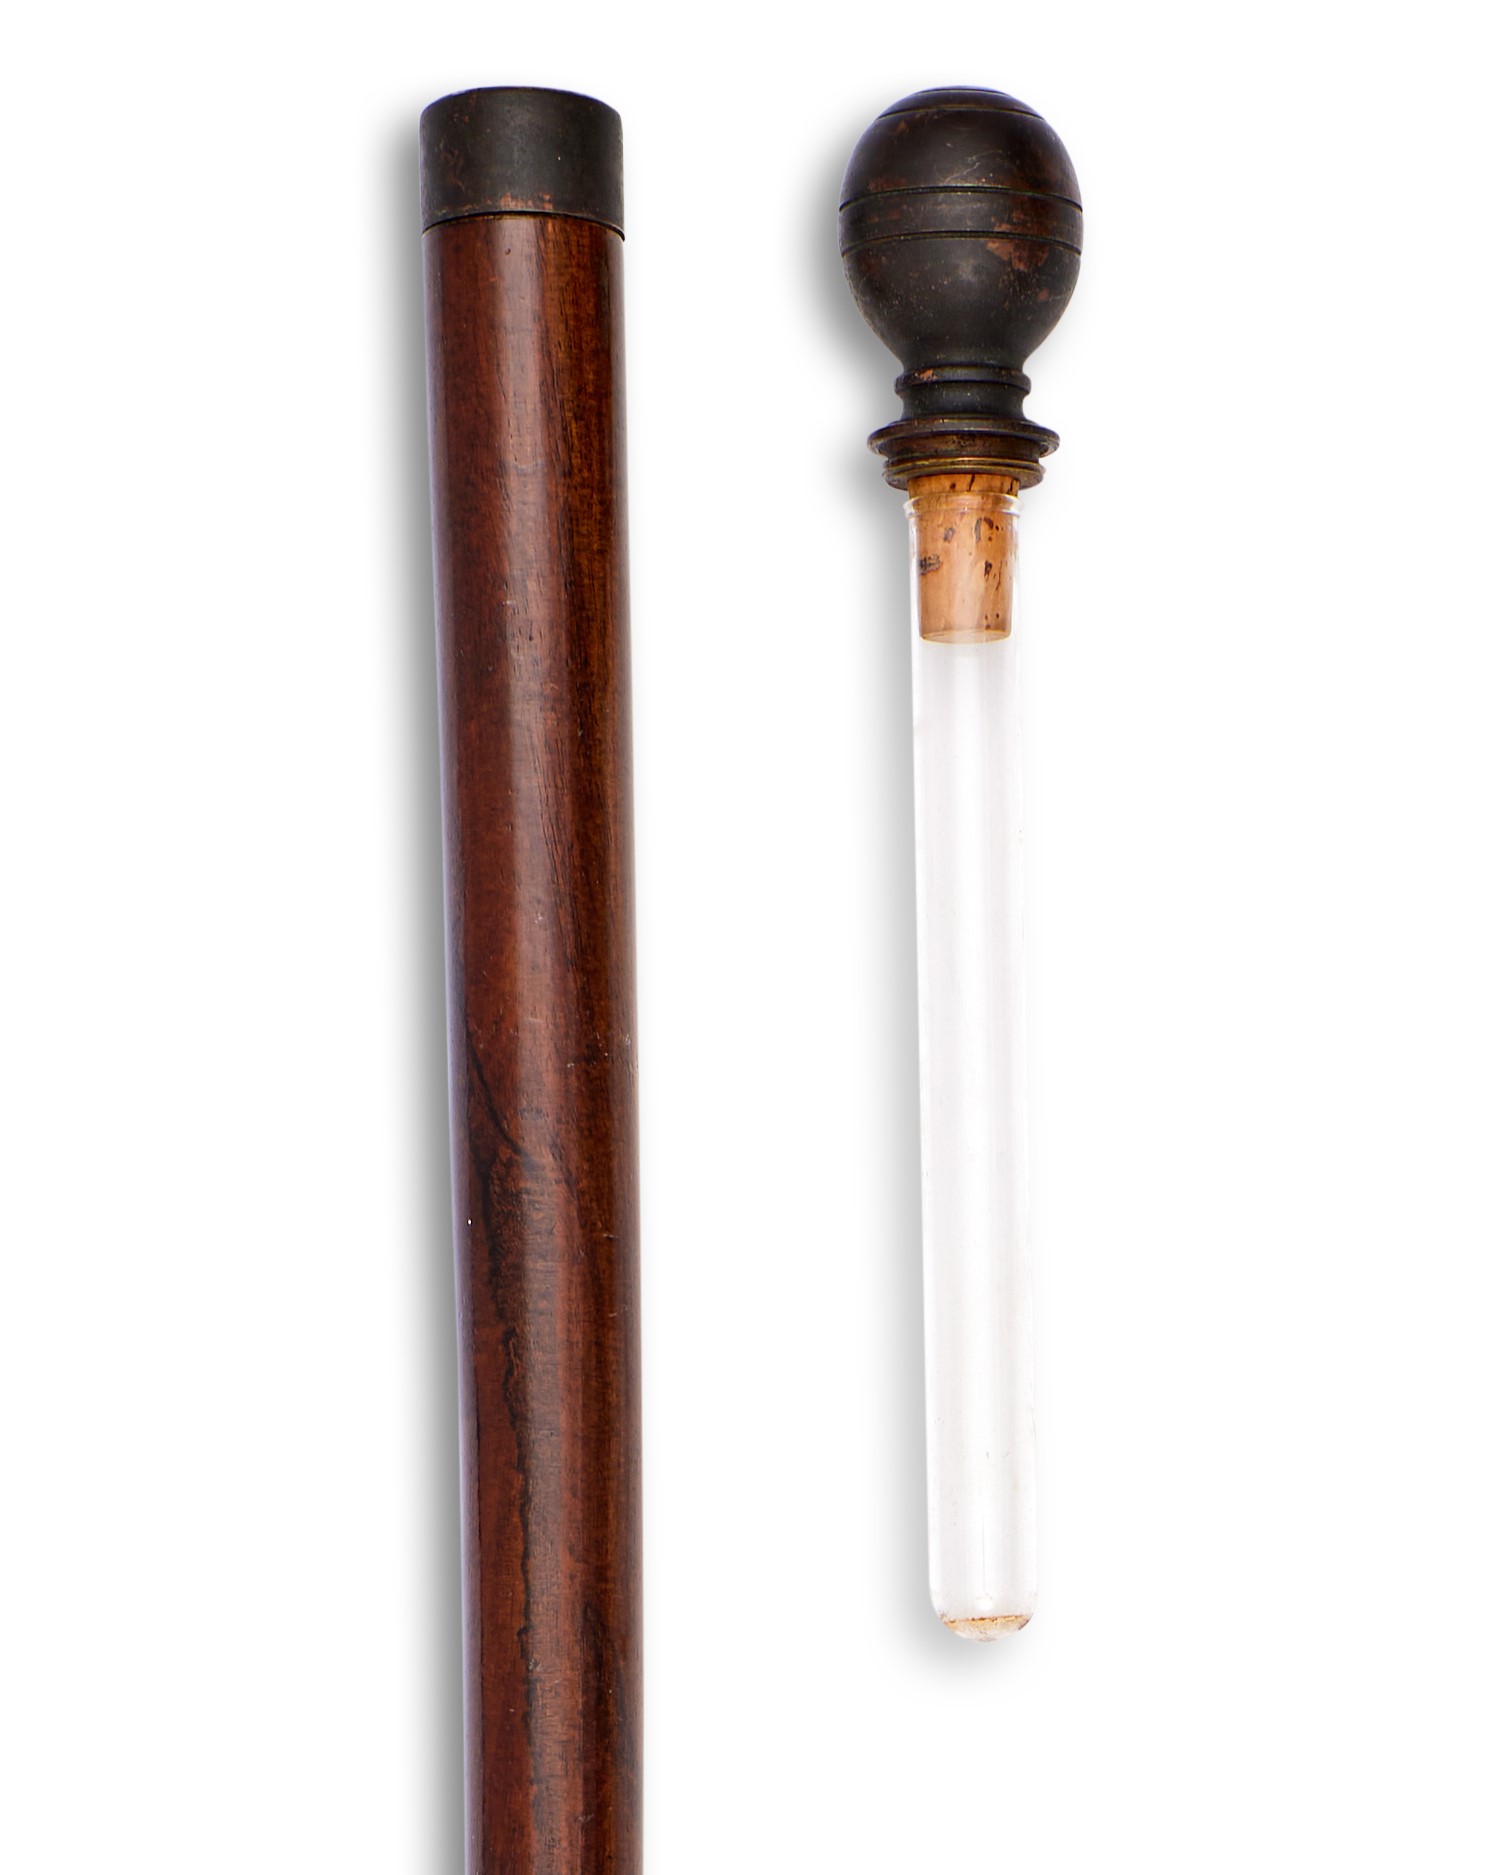 A LATE 19TH CENTURY NOVELTY WALKING CANE WITH CONCEALED GLASS TUBE